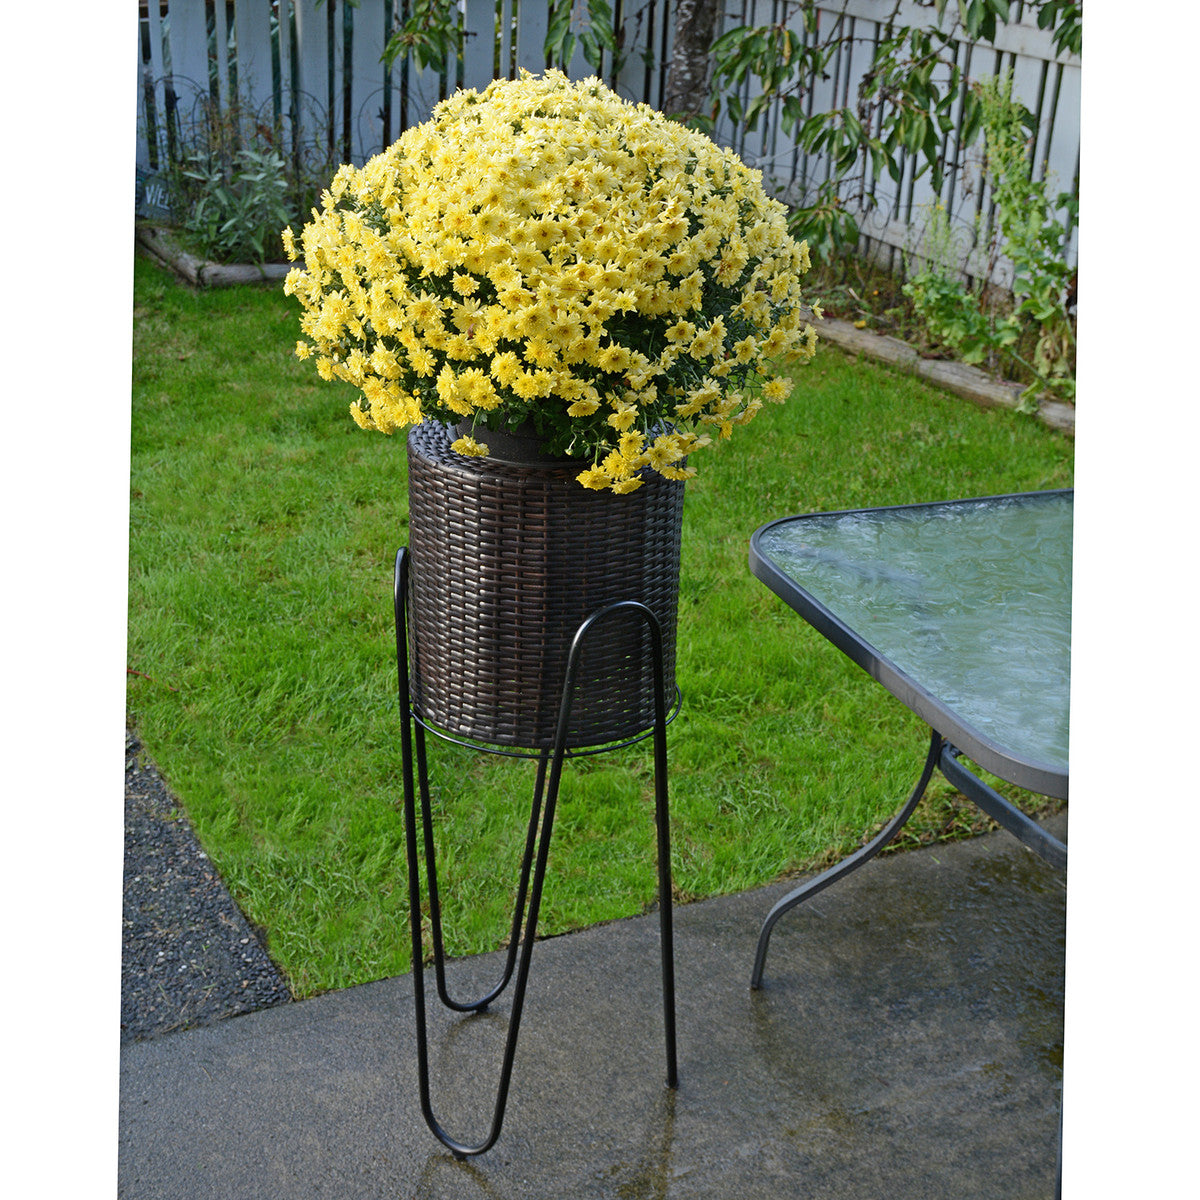 Wicker Planter w/Metal Stand 14" Resin Wicker Planter with Tall Metal Stand